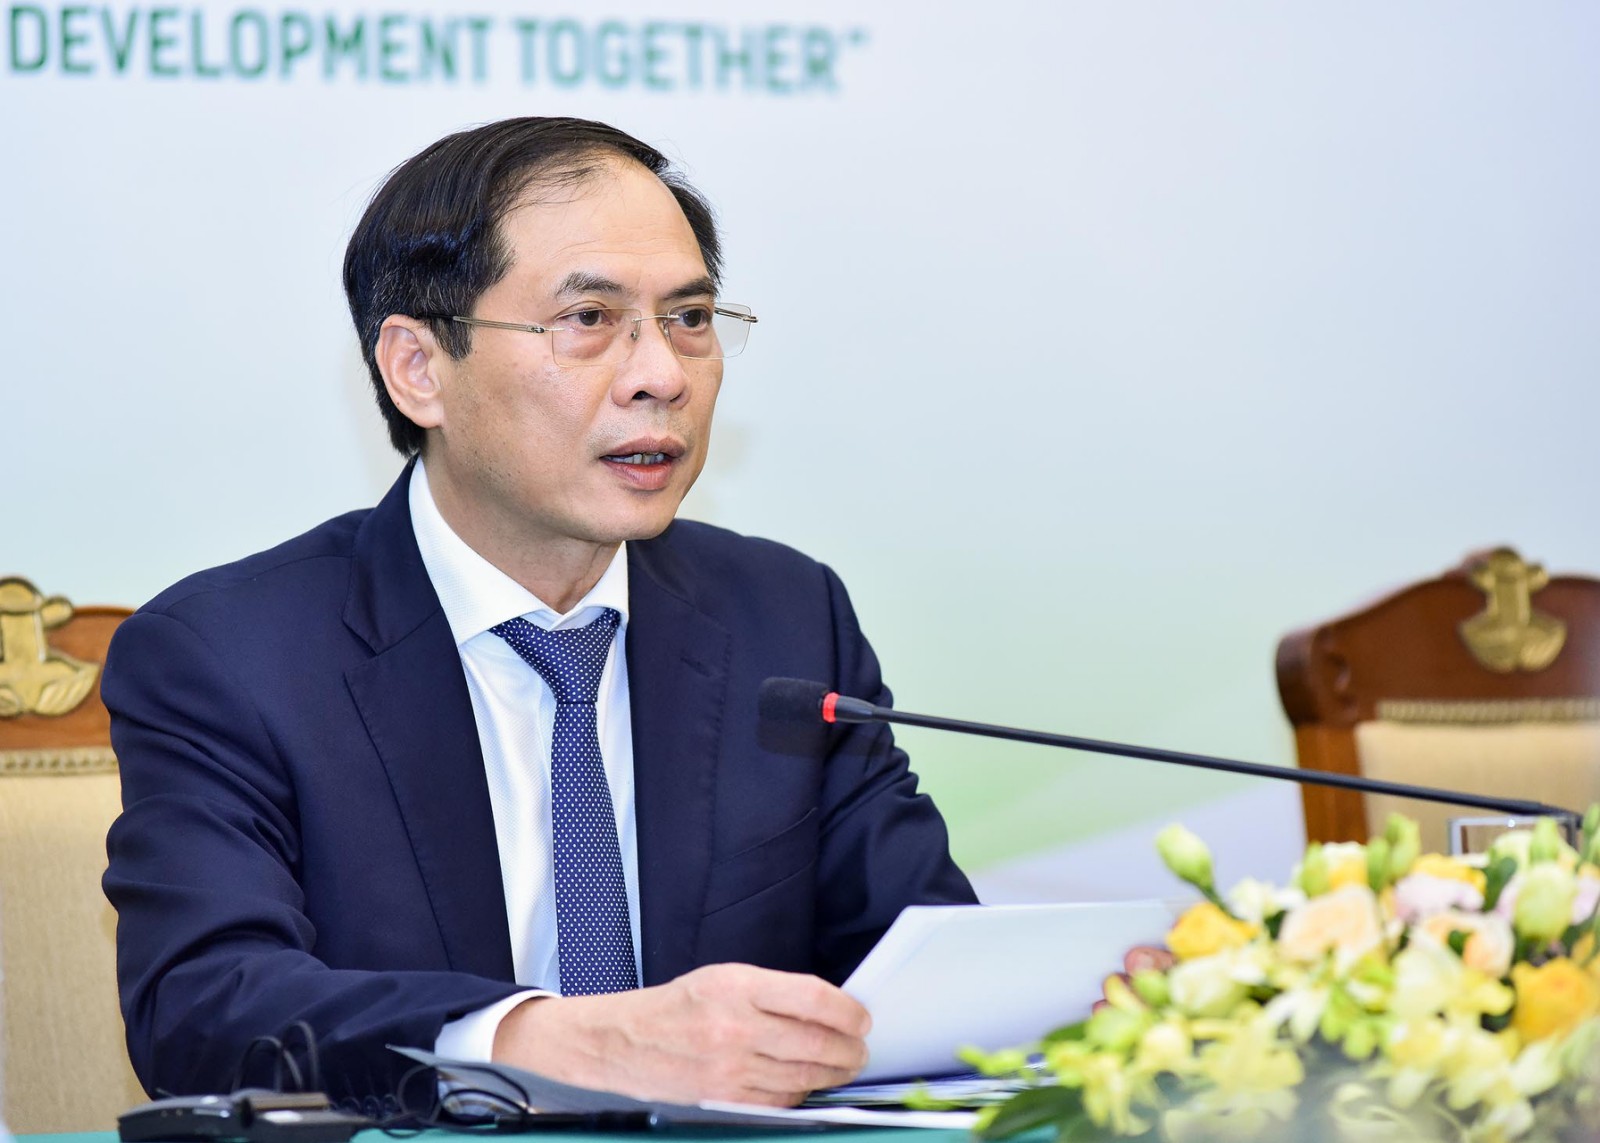 'Vietnam considers agriculture a key sector of the economy', said Minister Bui Thanh Son.